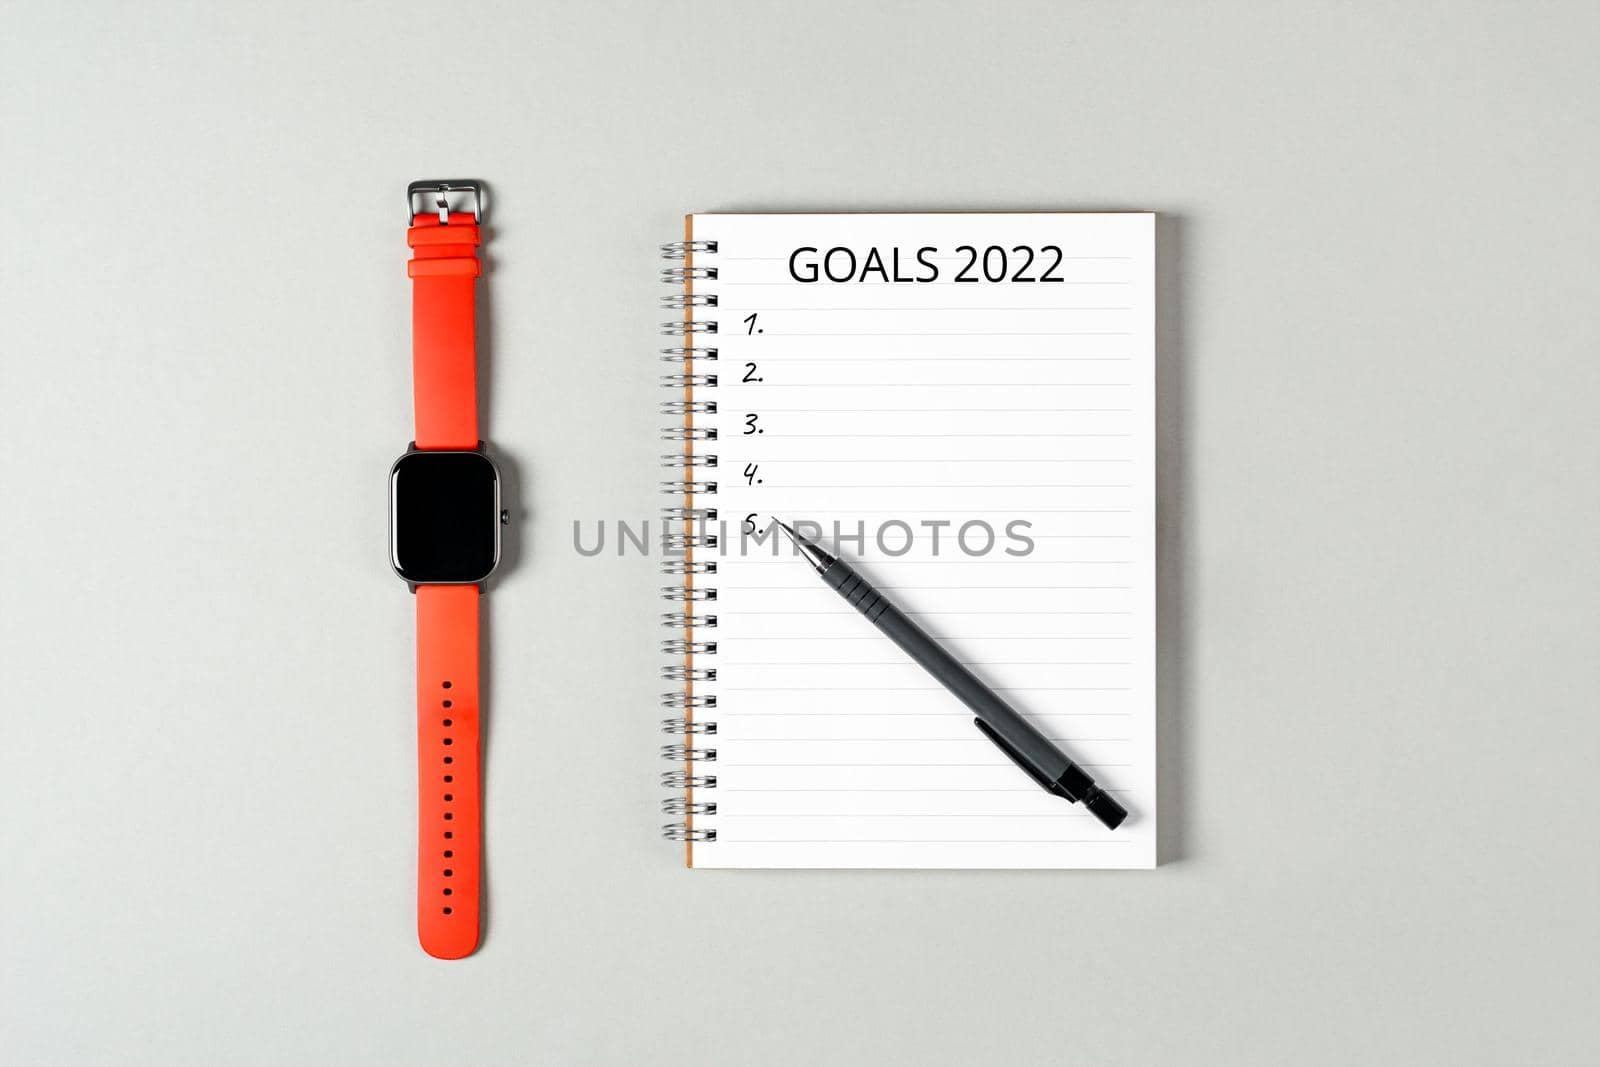 2022 goals concept banner. Notebook, pencil and a cup of black coffee isolated on gray background.